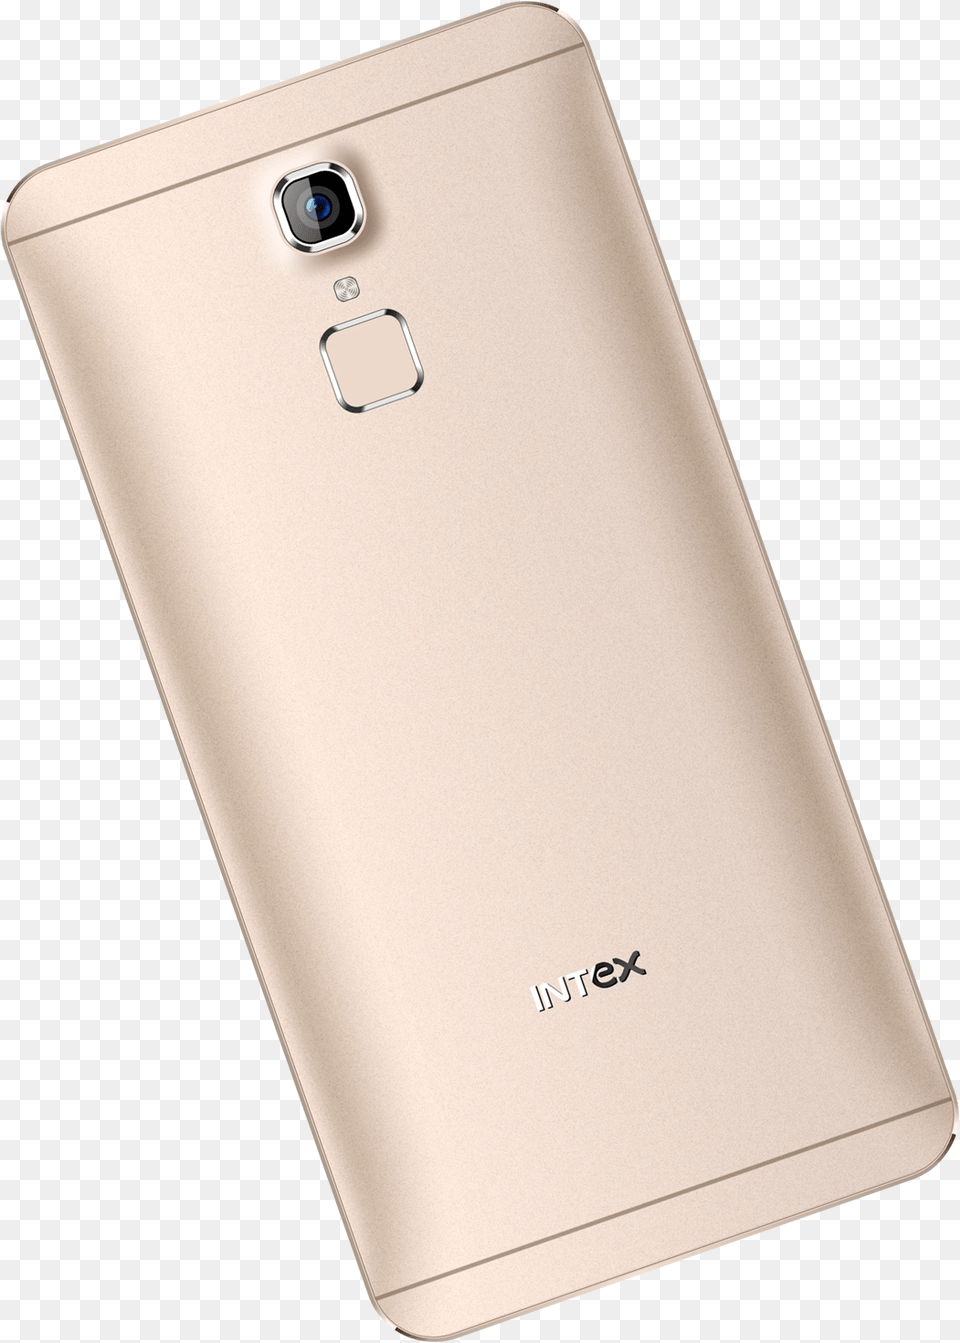 Mobiles 4g With Fingerprint, Electronics, Mobile Phone, Phone, Computer Hardware Png Image